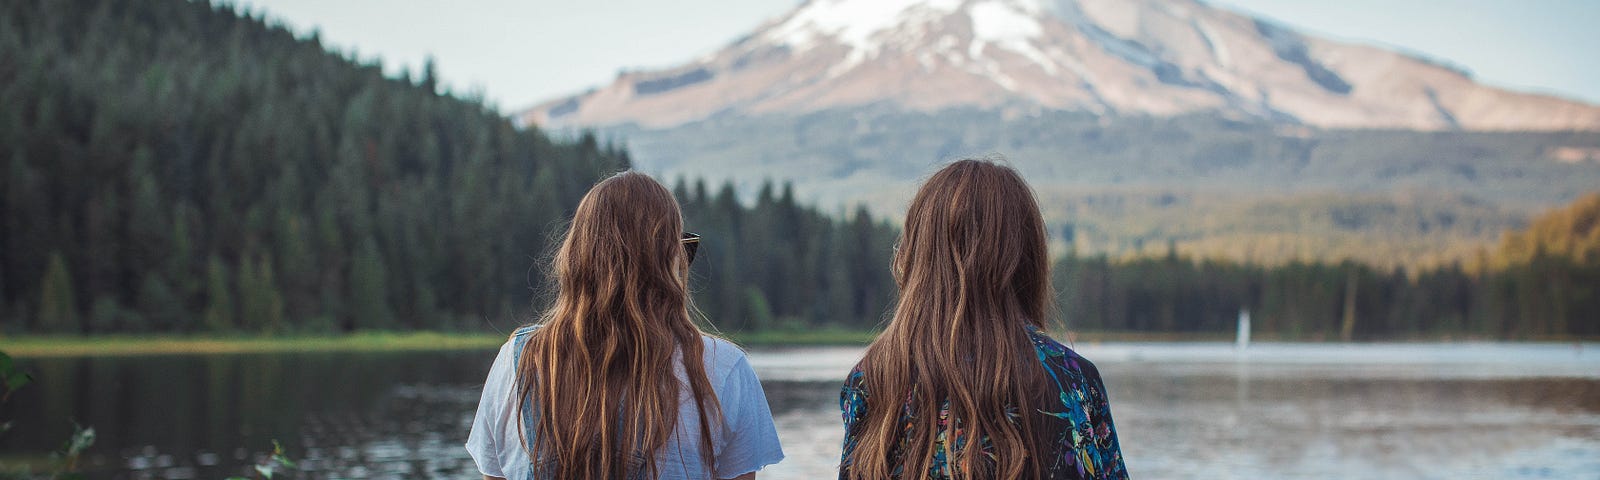 Two young women are sitting on a ledge of a stone wall, overlooking a lake. Their backs are faced toward the camera. Both are wearing comfortable clothing and have long brown hair that falls down their back. The view in front of them is an ascending forest of lush pine trees and a great snow-capped mountain in the distance.